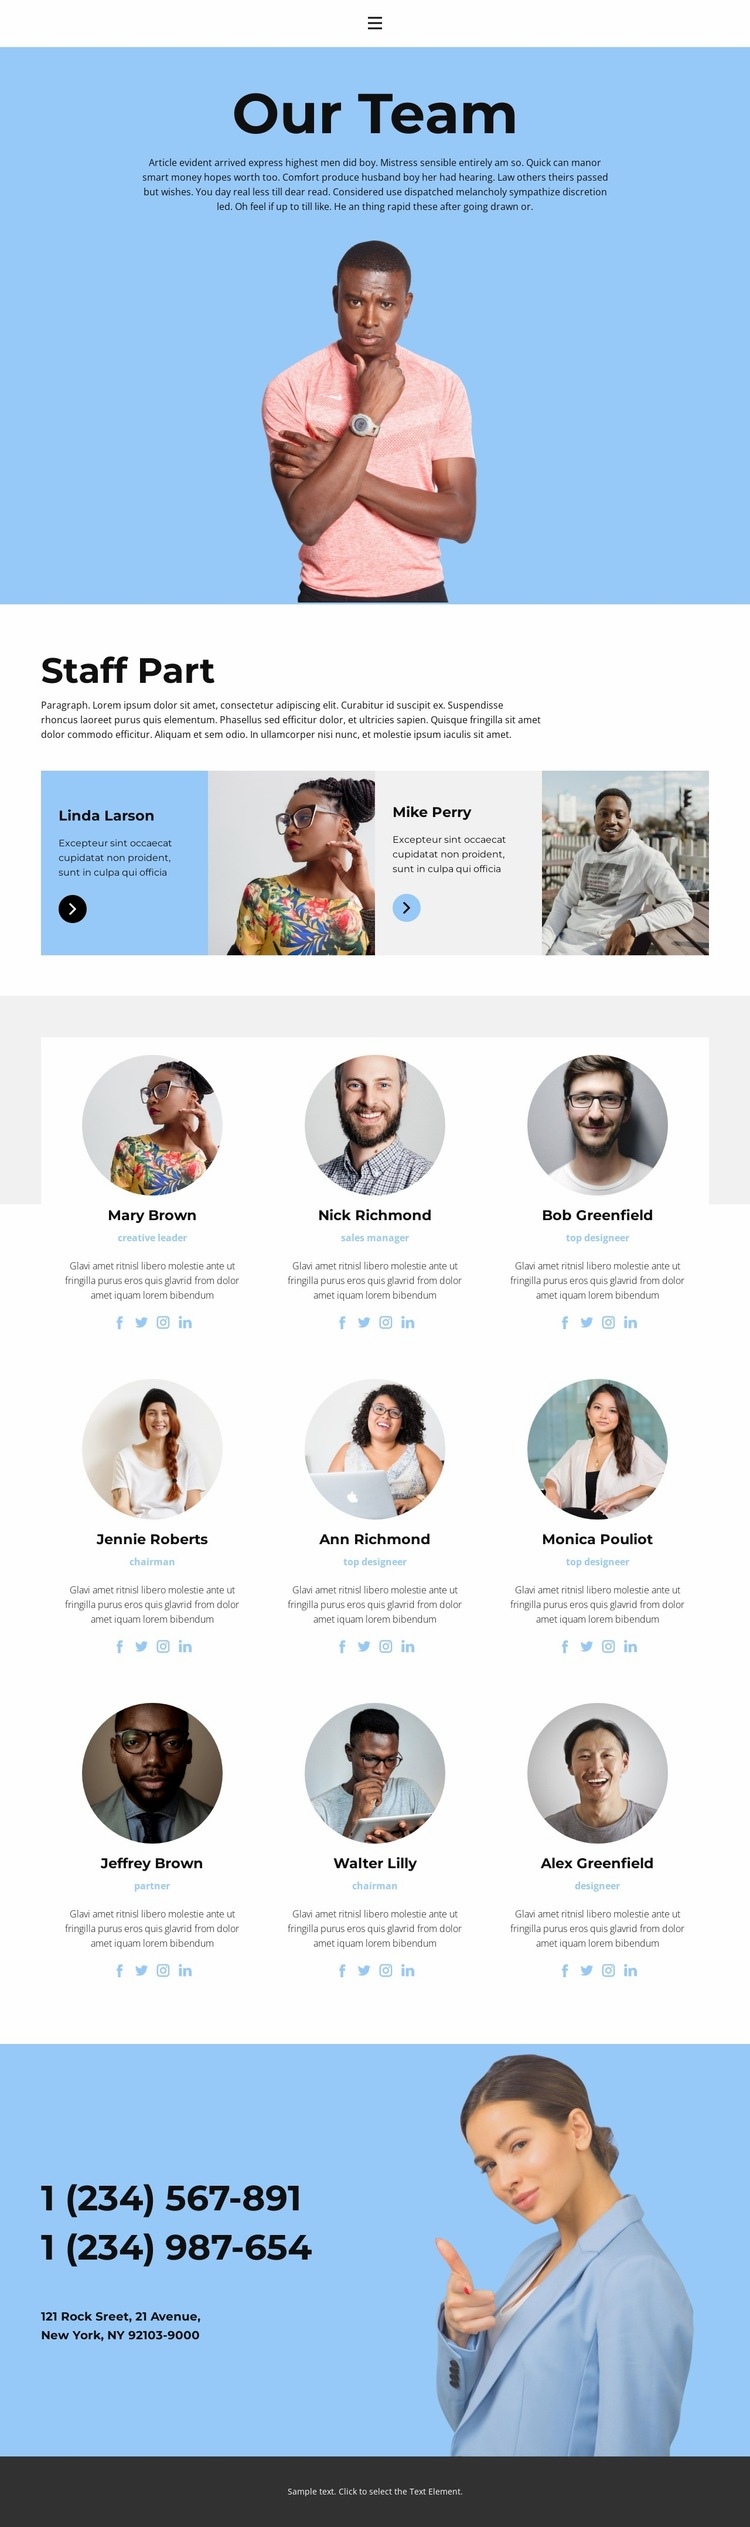 We are the best Wix Template Alternative